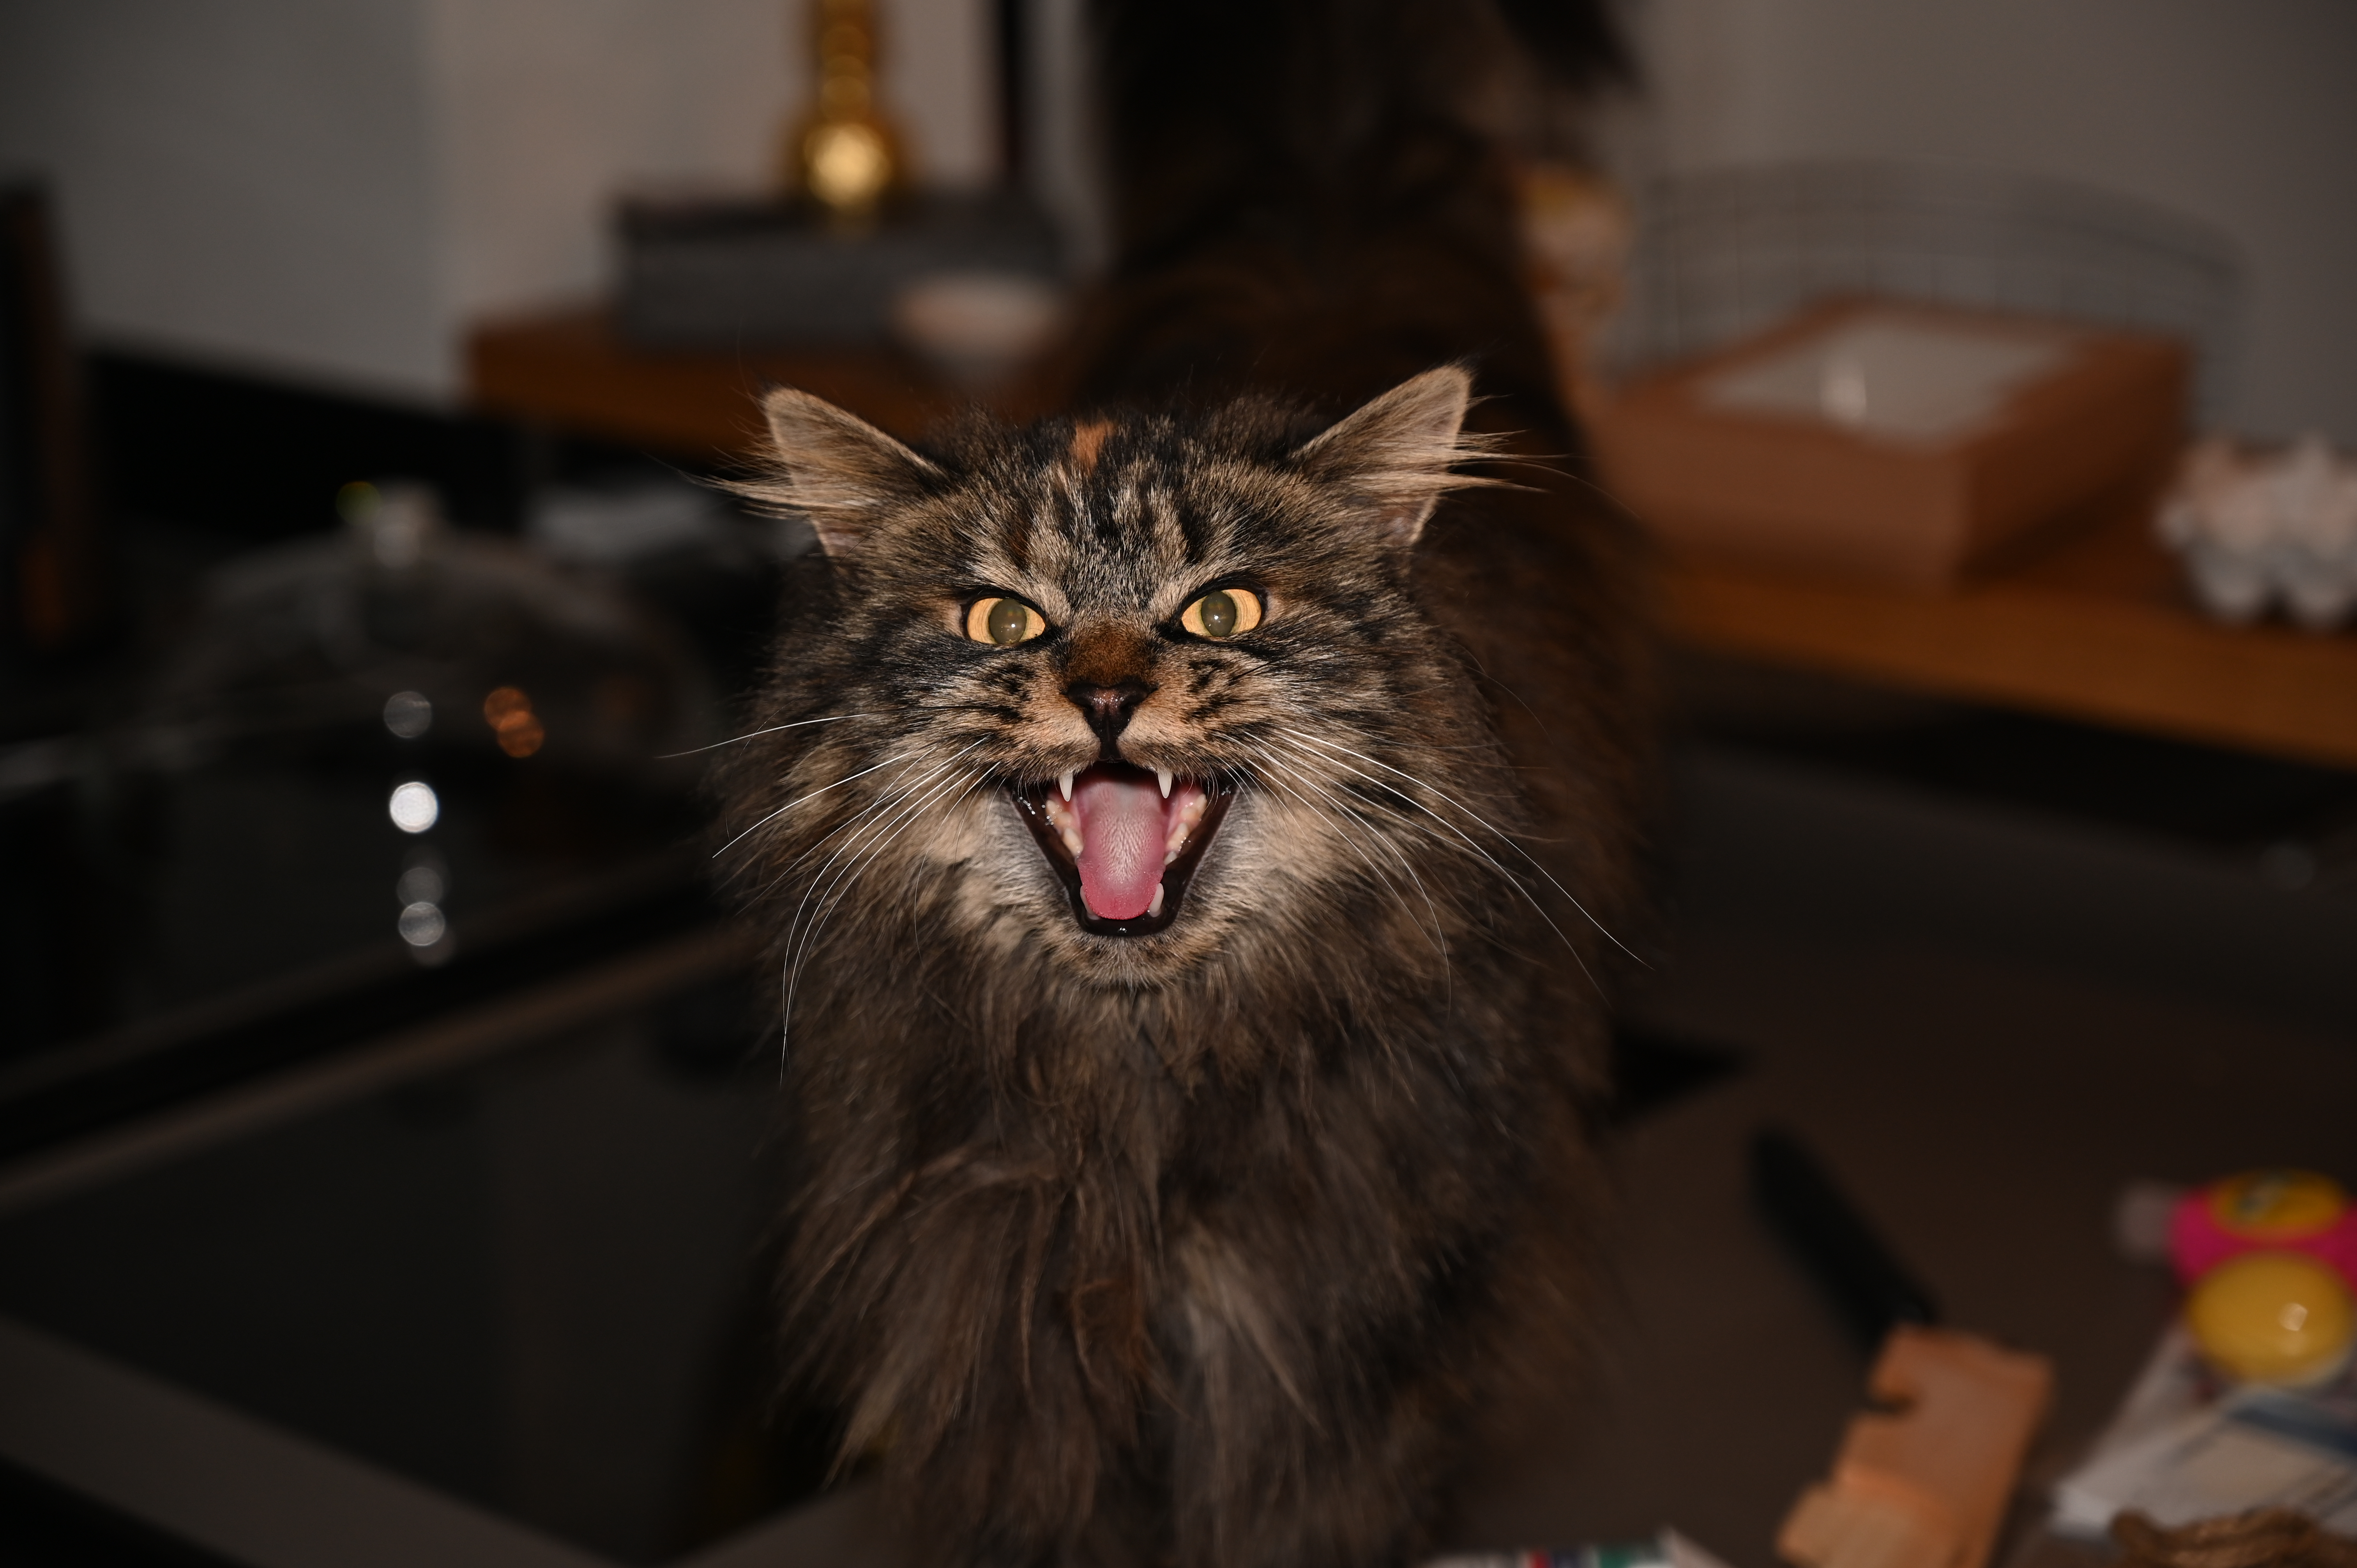 Angry Cat, #angry #cat #cute #maine-coon #animal #Katze #ga…